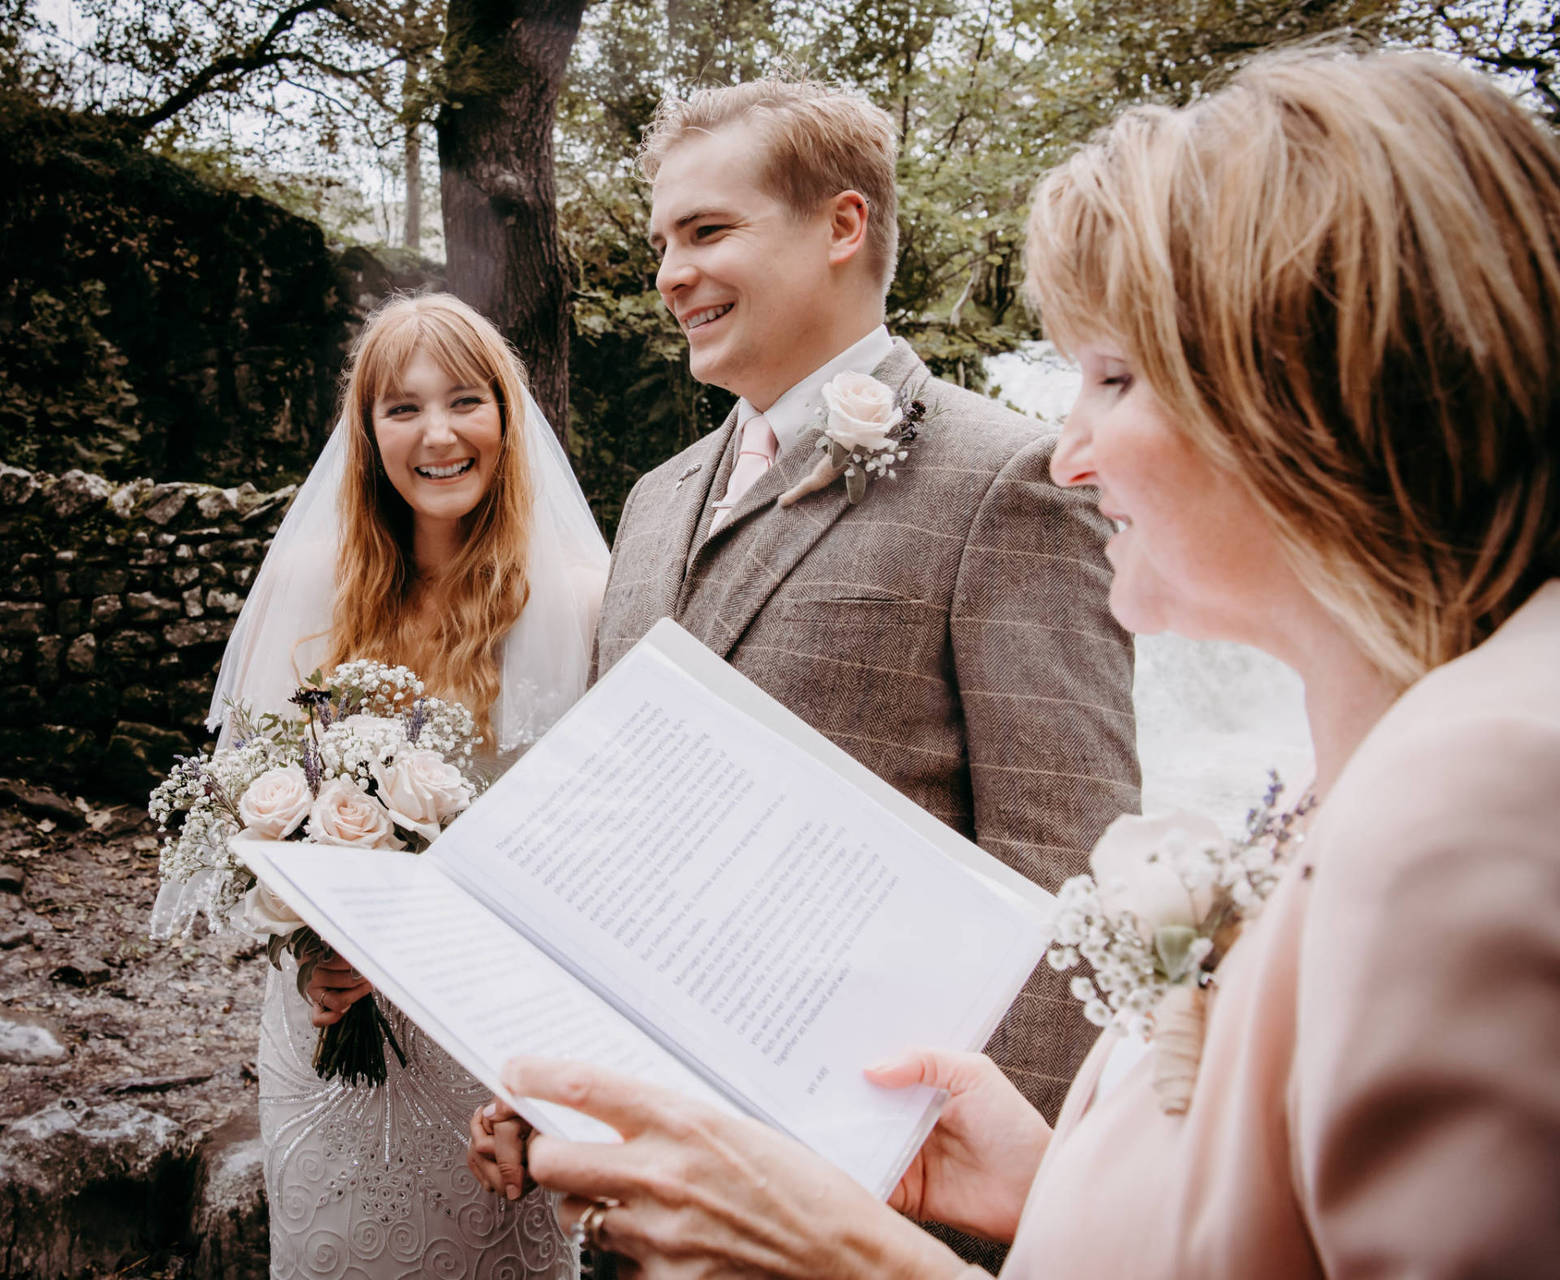 How To Become A Celebrant